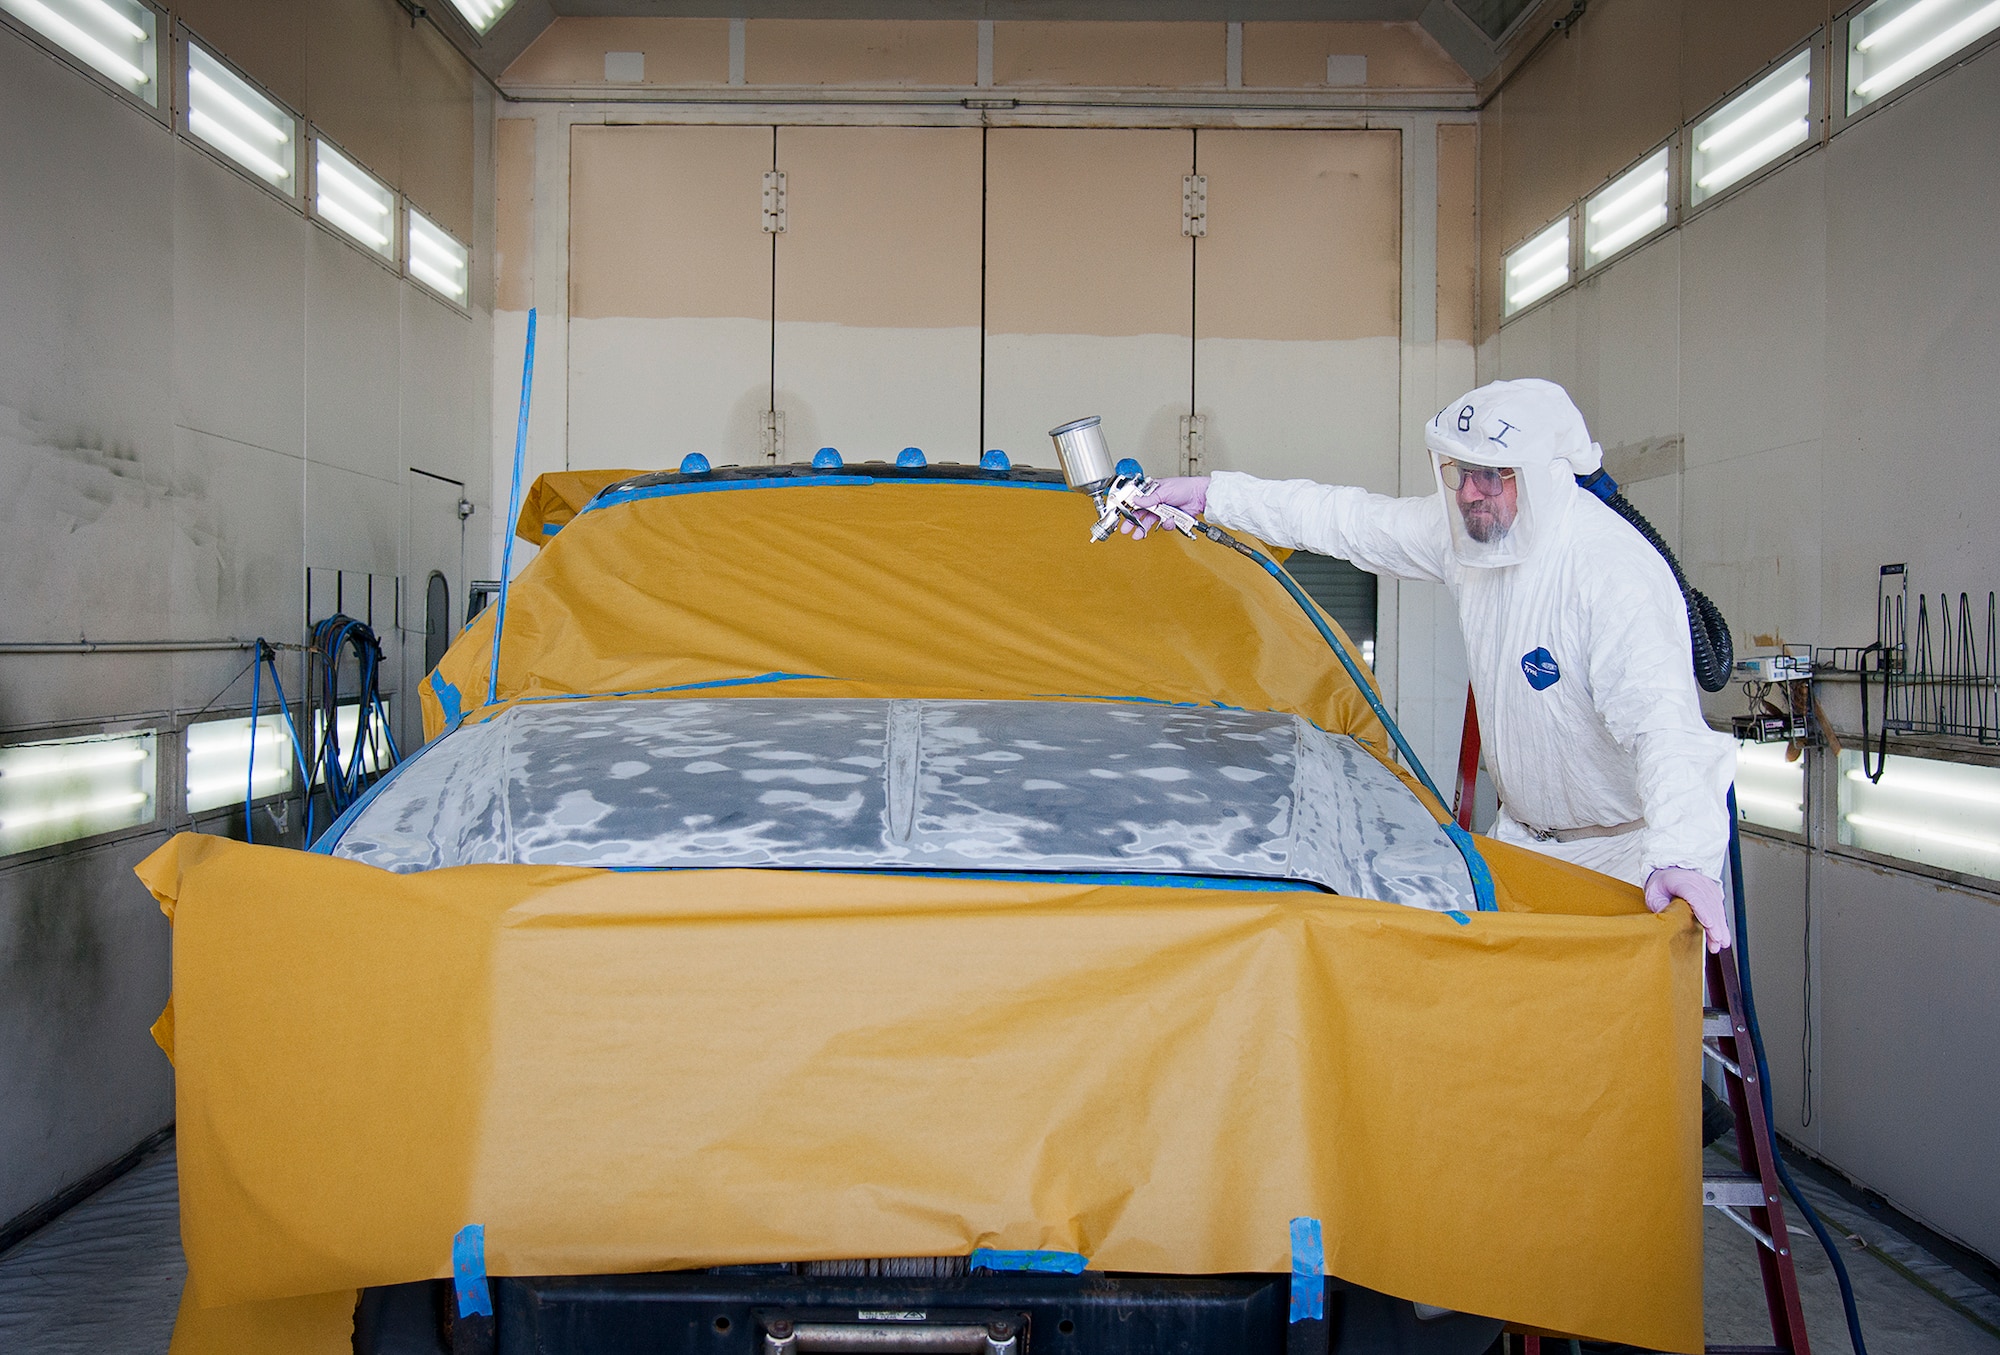 Henry Isaacs  prepares to paint the hood of a truck Aug. 20,2014, at Eglin Air Force Base, Fla. Repainting vehicle parts affected by the sun and weather is part of 96th Logistics Readiness Squadron’s corrosion control program. A three-person team is responsible for restoring and extending the lives of Eglin AFB’s vehicle fleet. Approximately 50 vehicles per year are painted by the team. Isaacs is assigned to the 96th LRS. (U.S. Air Force photo/Samuel King Jr.)